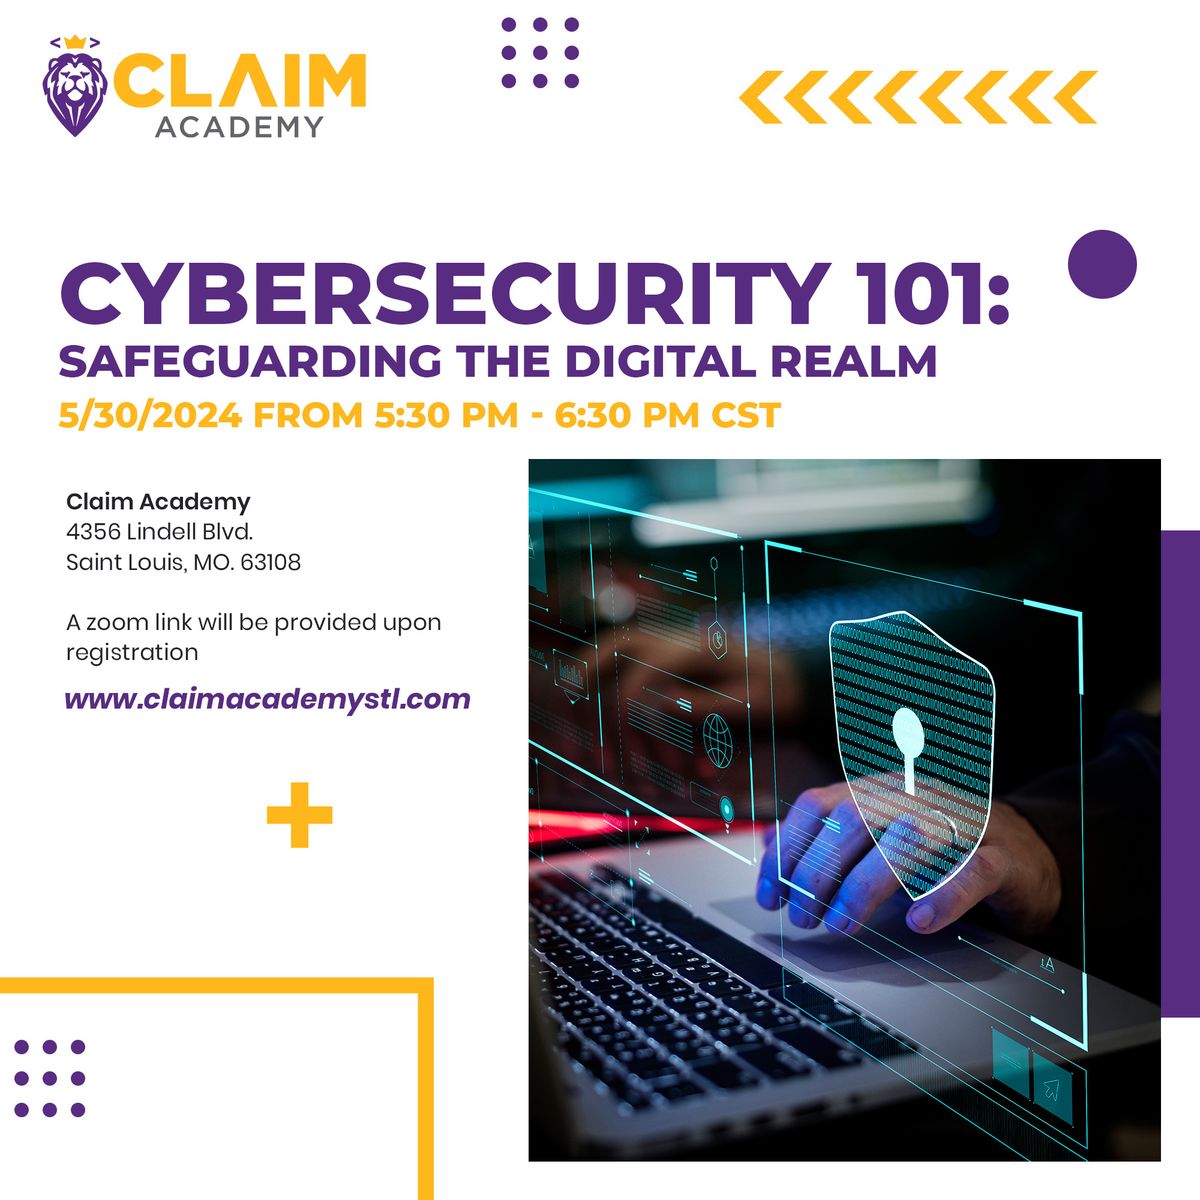 Cybersecurity 101: Safeguarding the Digital Realm